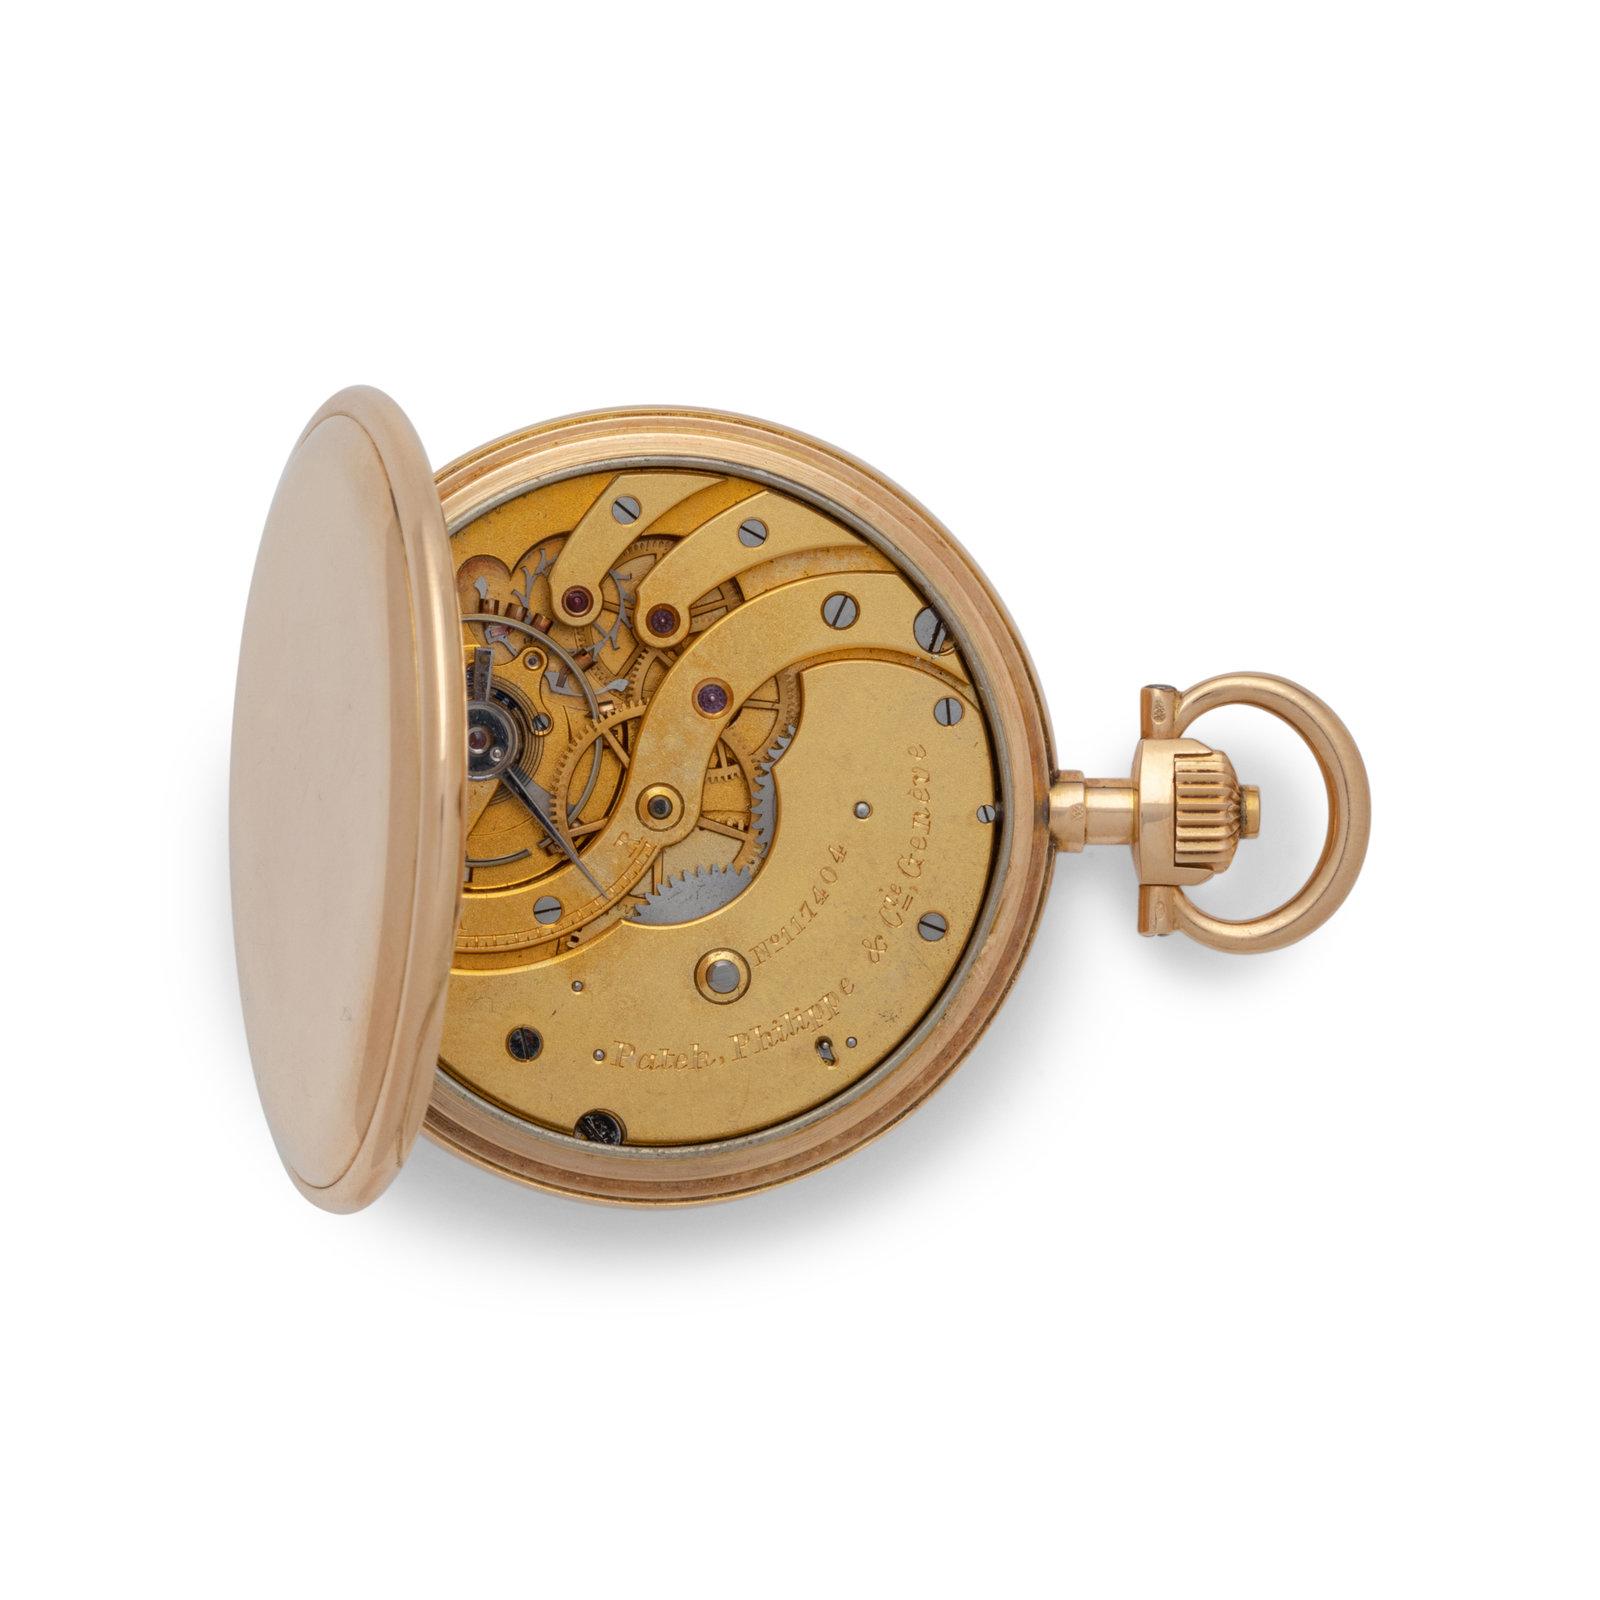 louis philippe watches gold